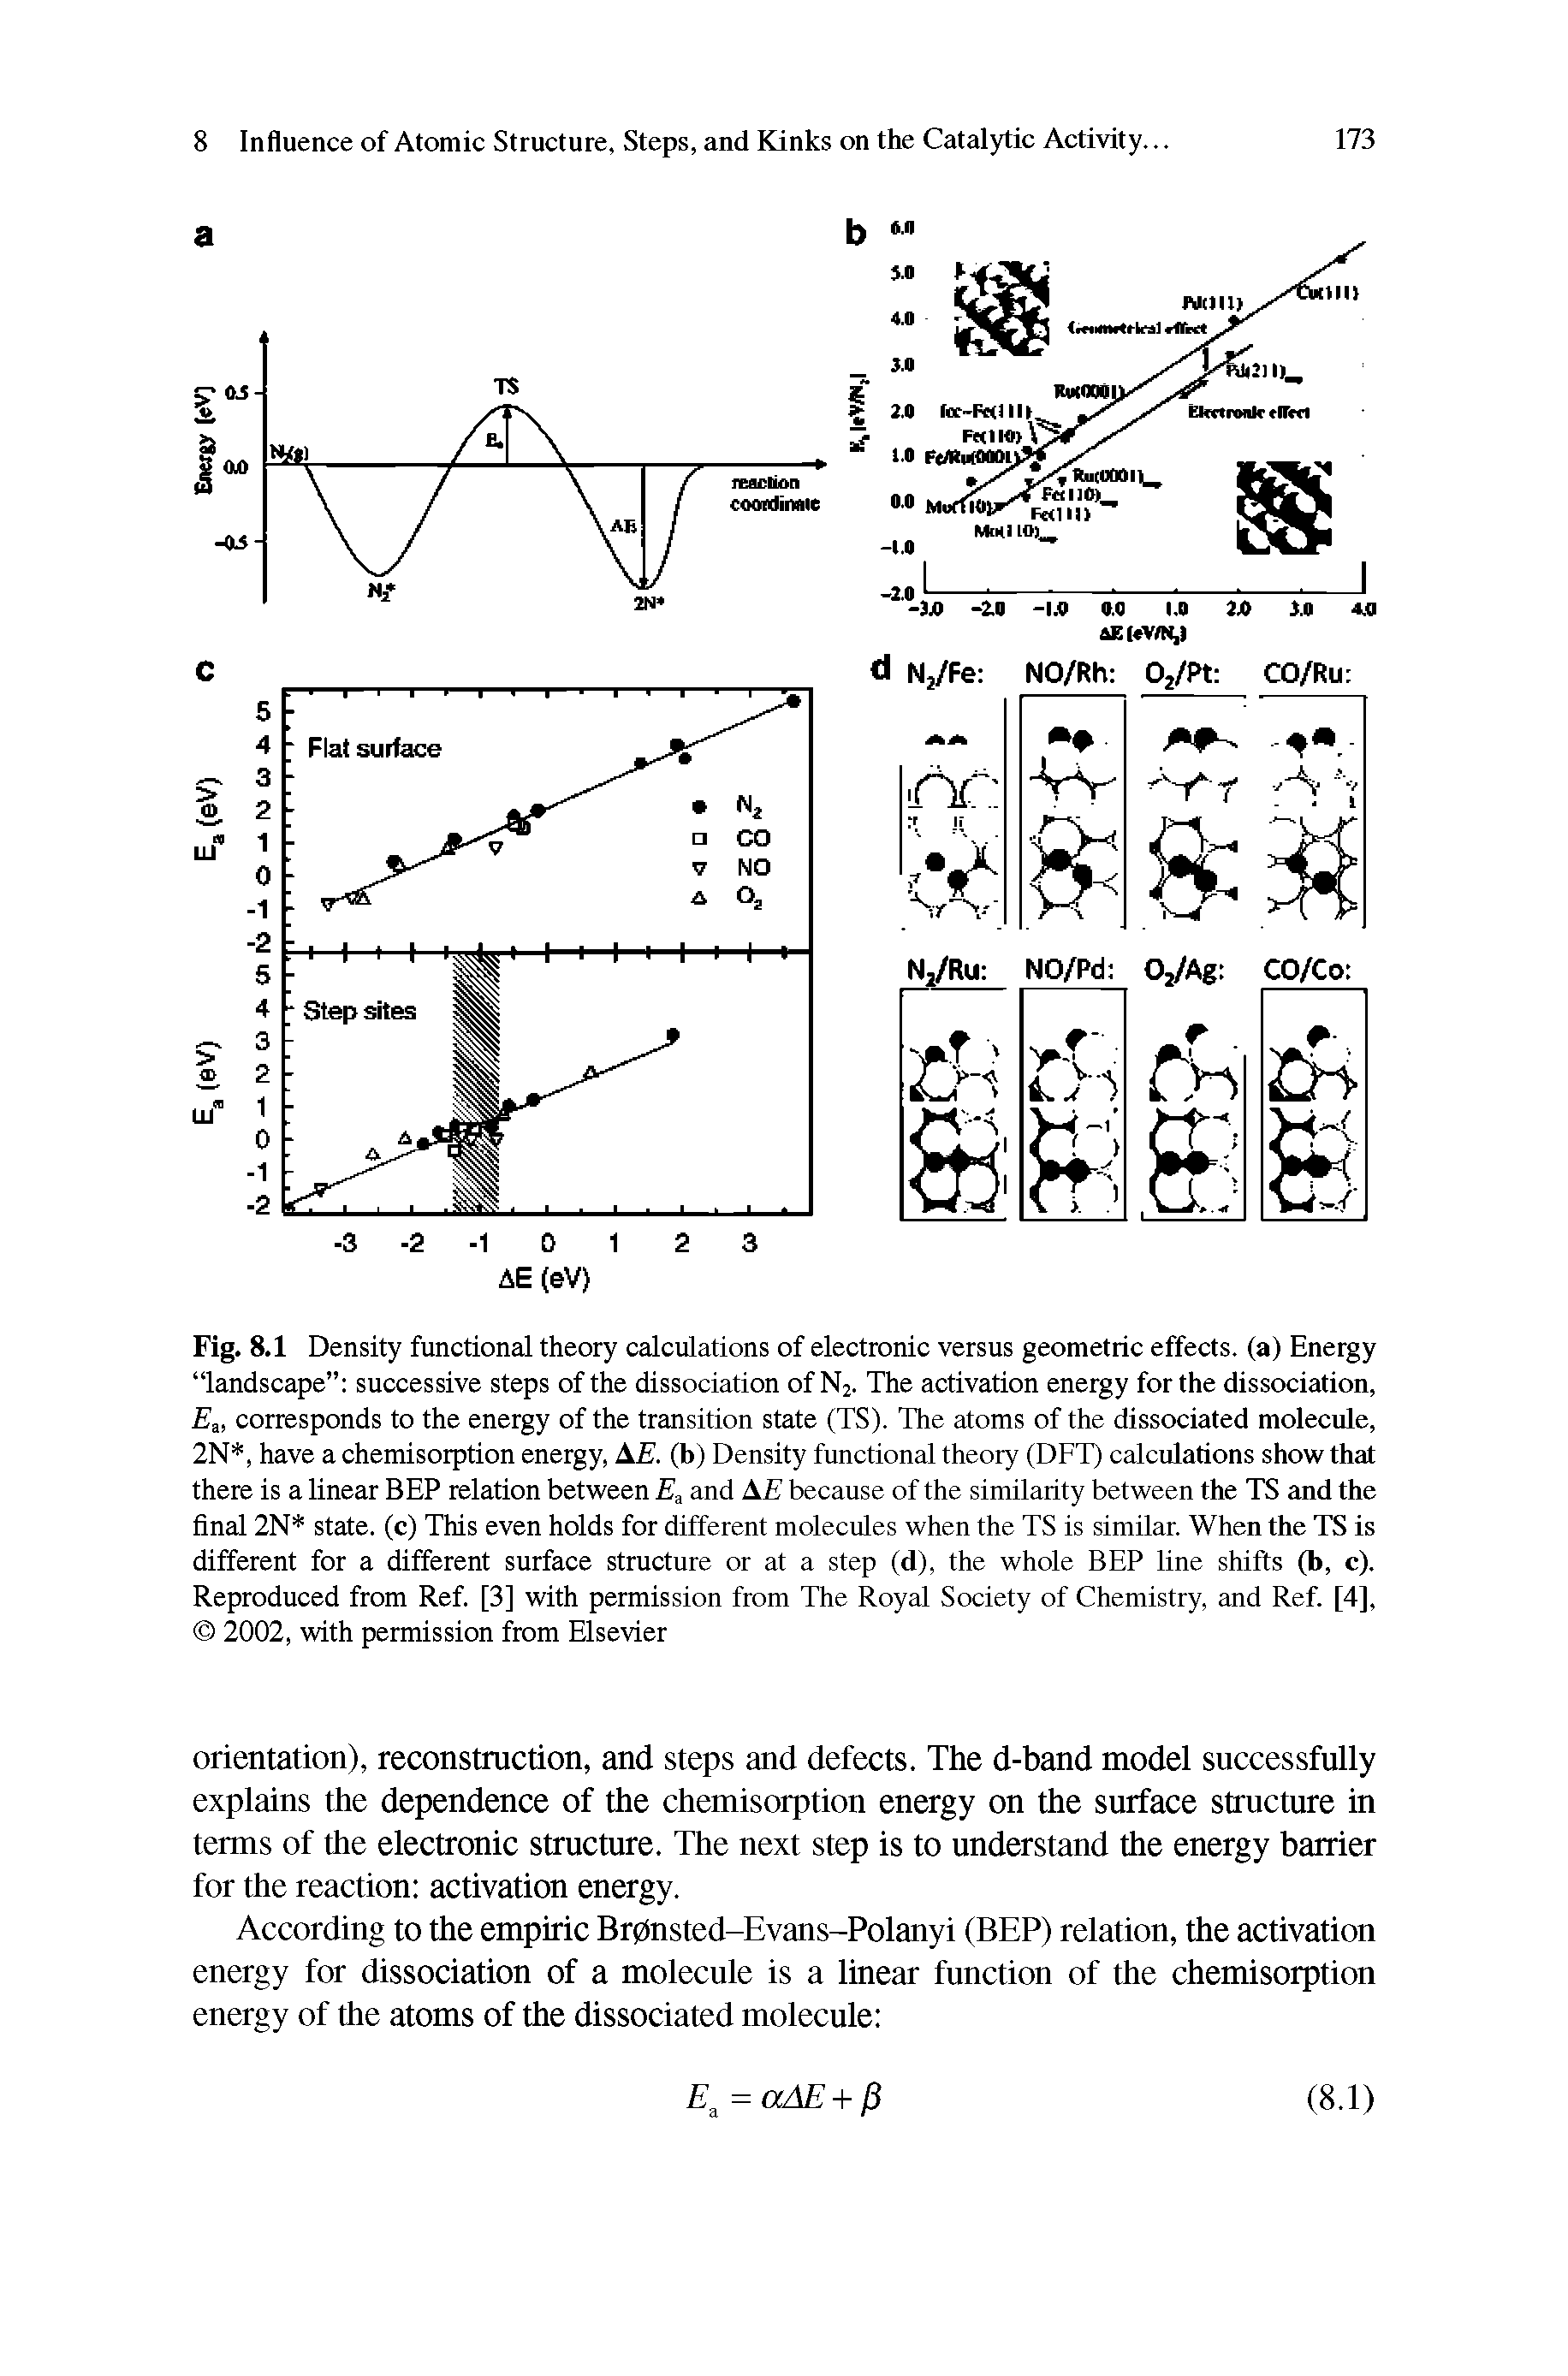 Fig. 8.1 Density functional theory calculations of electronic versus geometric effects, (a) Eneigy landscape successive steps of the dissociation of N2. The activation energy for the dissociation, Fa, corresponds to the eneigy of the transition state (TS). The atoms of the dissociated molecule, 2N, have a chemisorption eneigy, (b) Density functional theory (DPT) calculations show that...